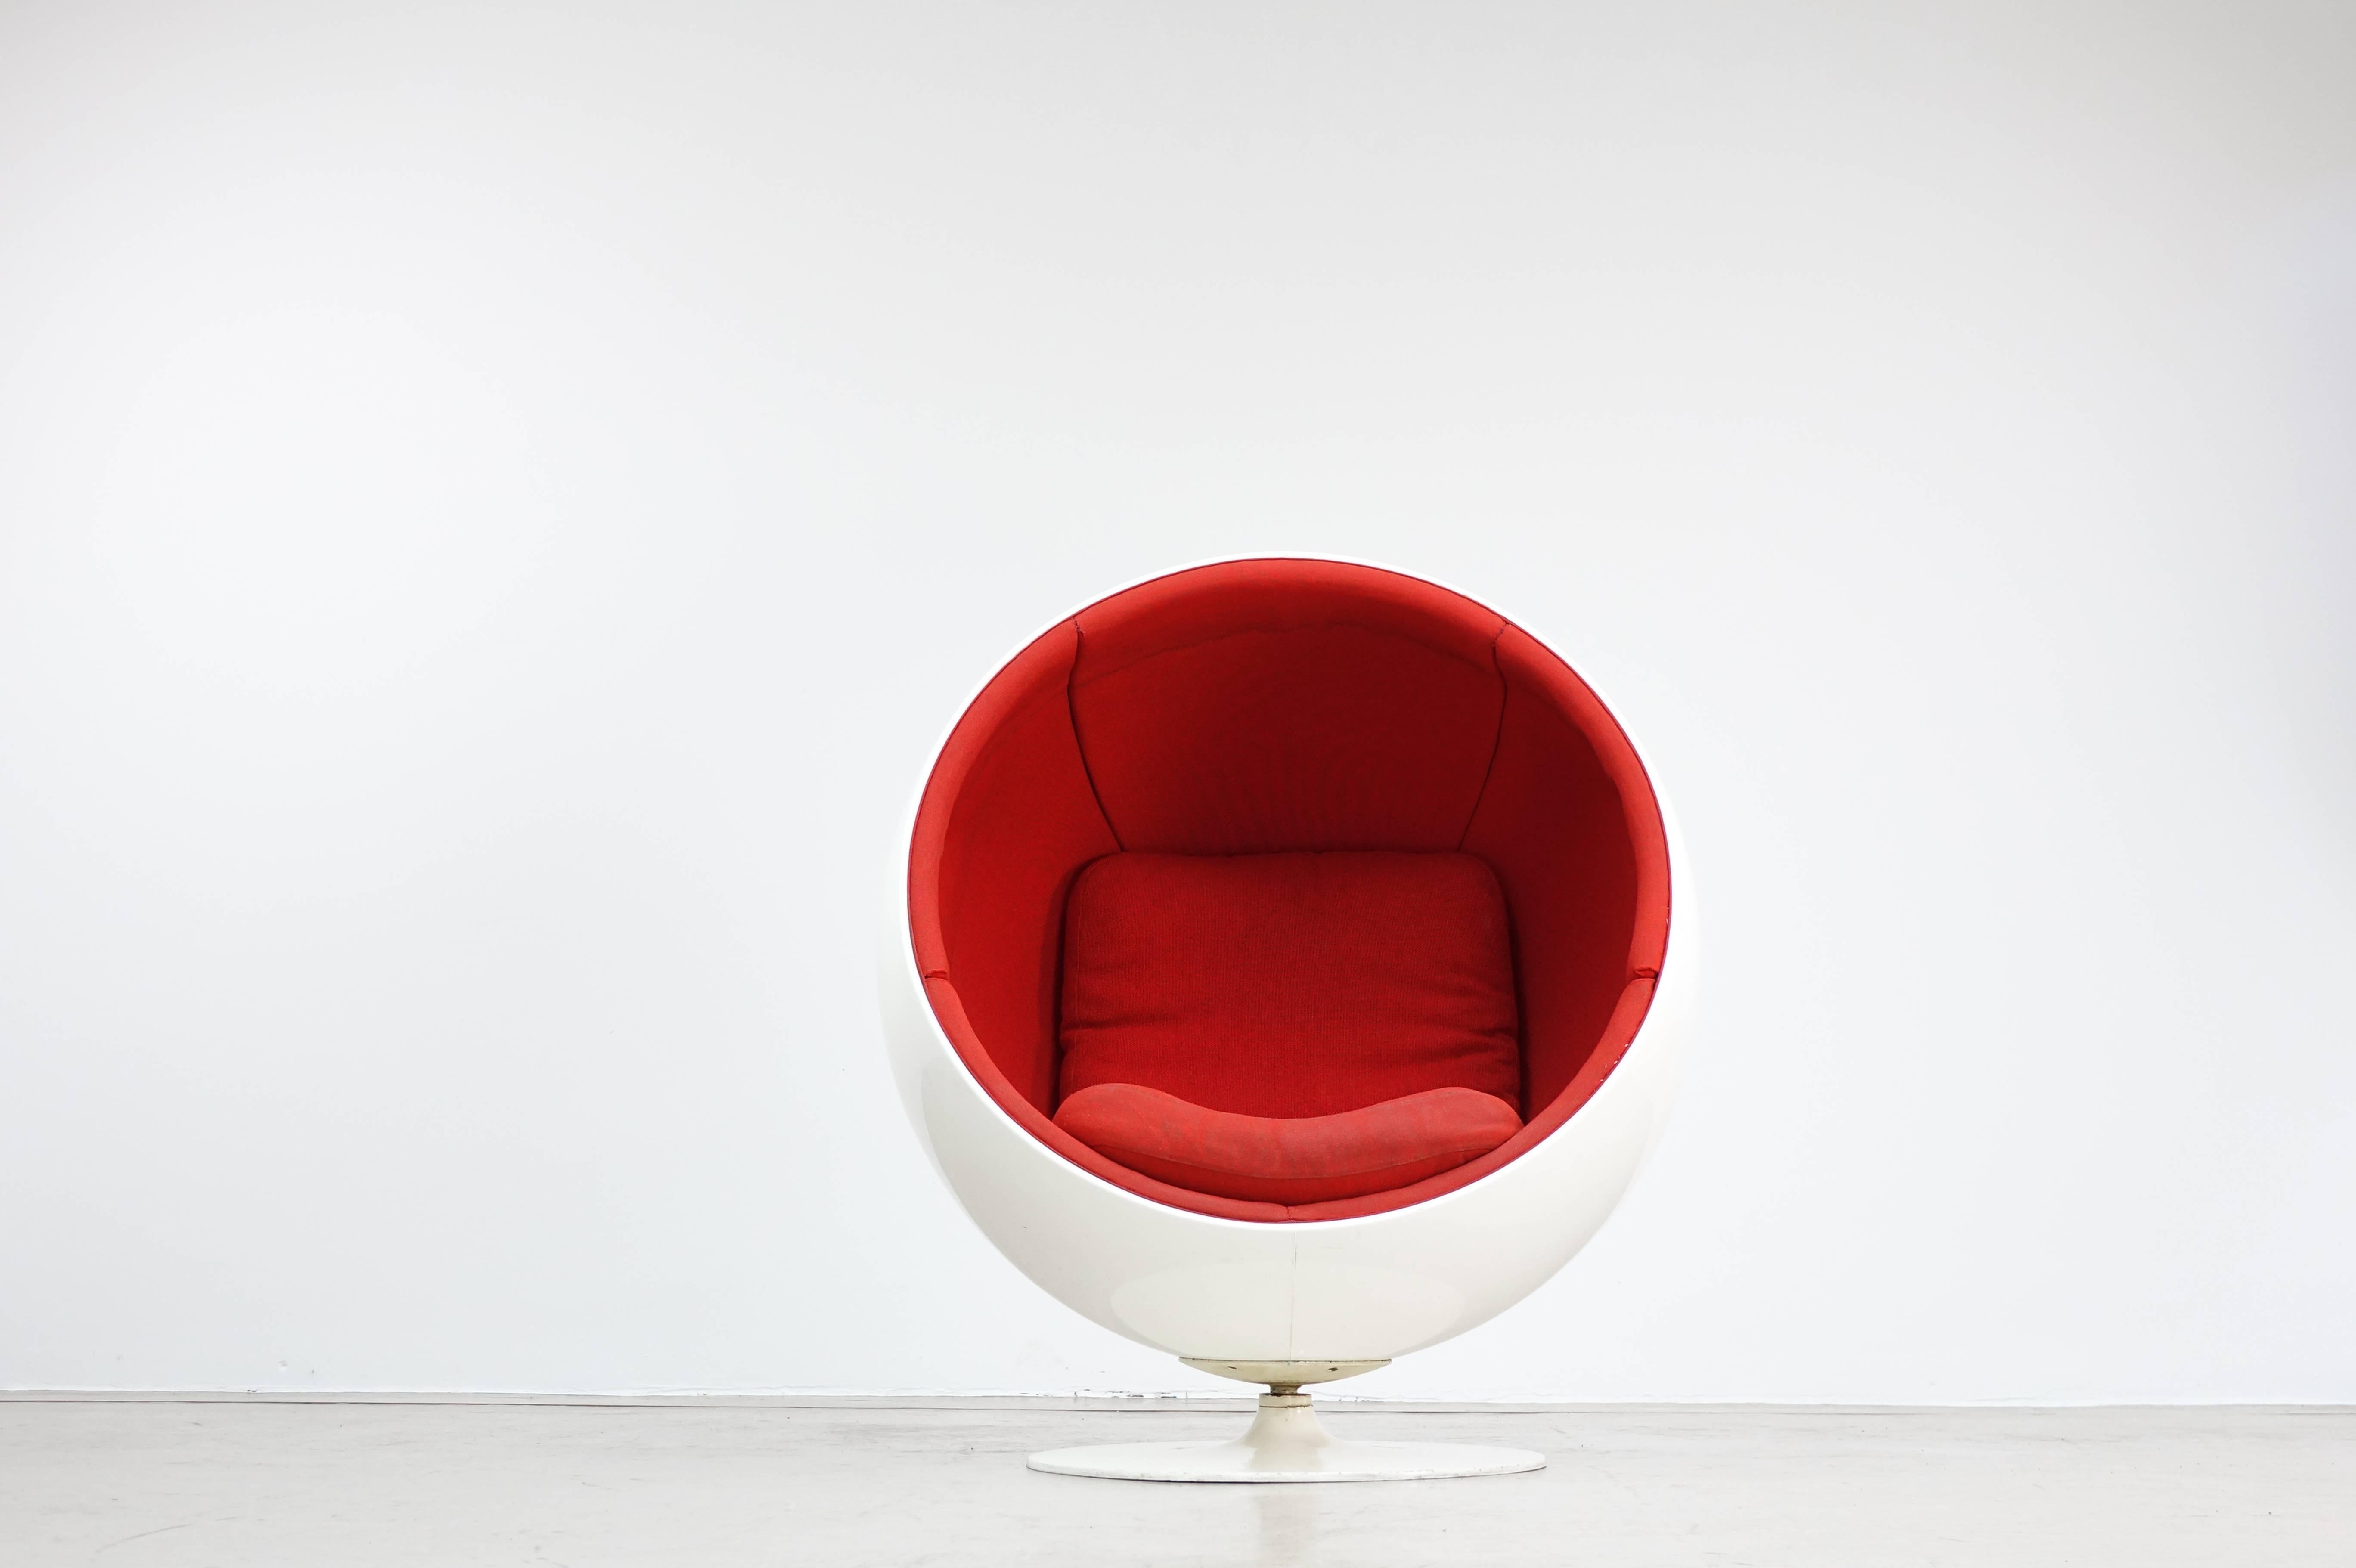 Finnish Ball Chair by Asko - Eero Aarnio 1963, Rare First Edition